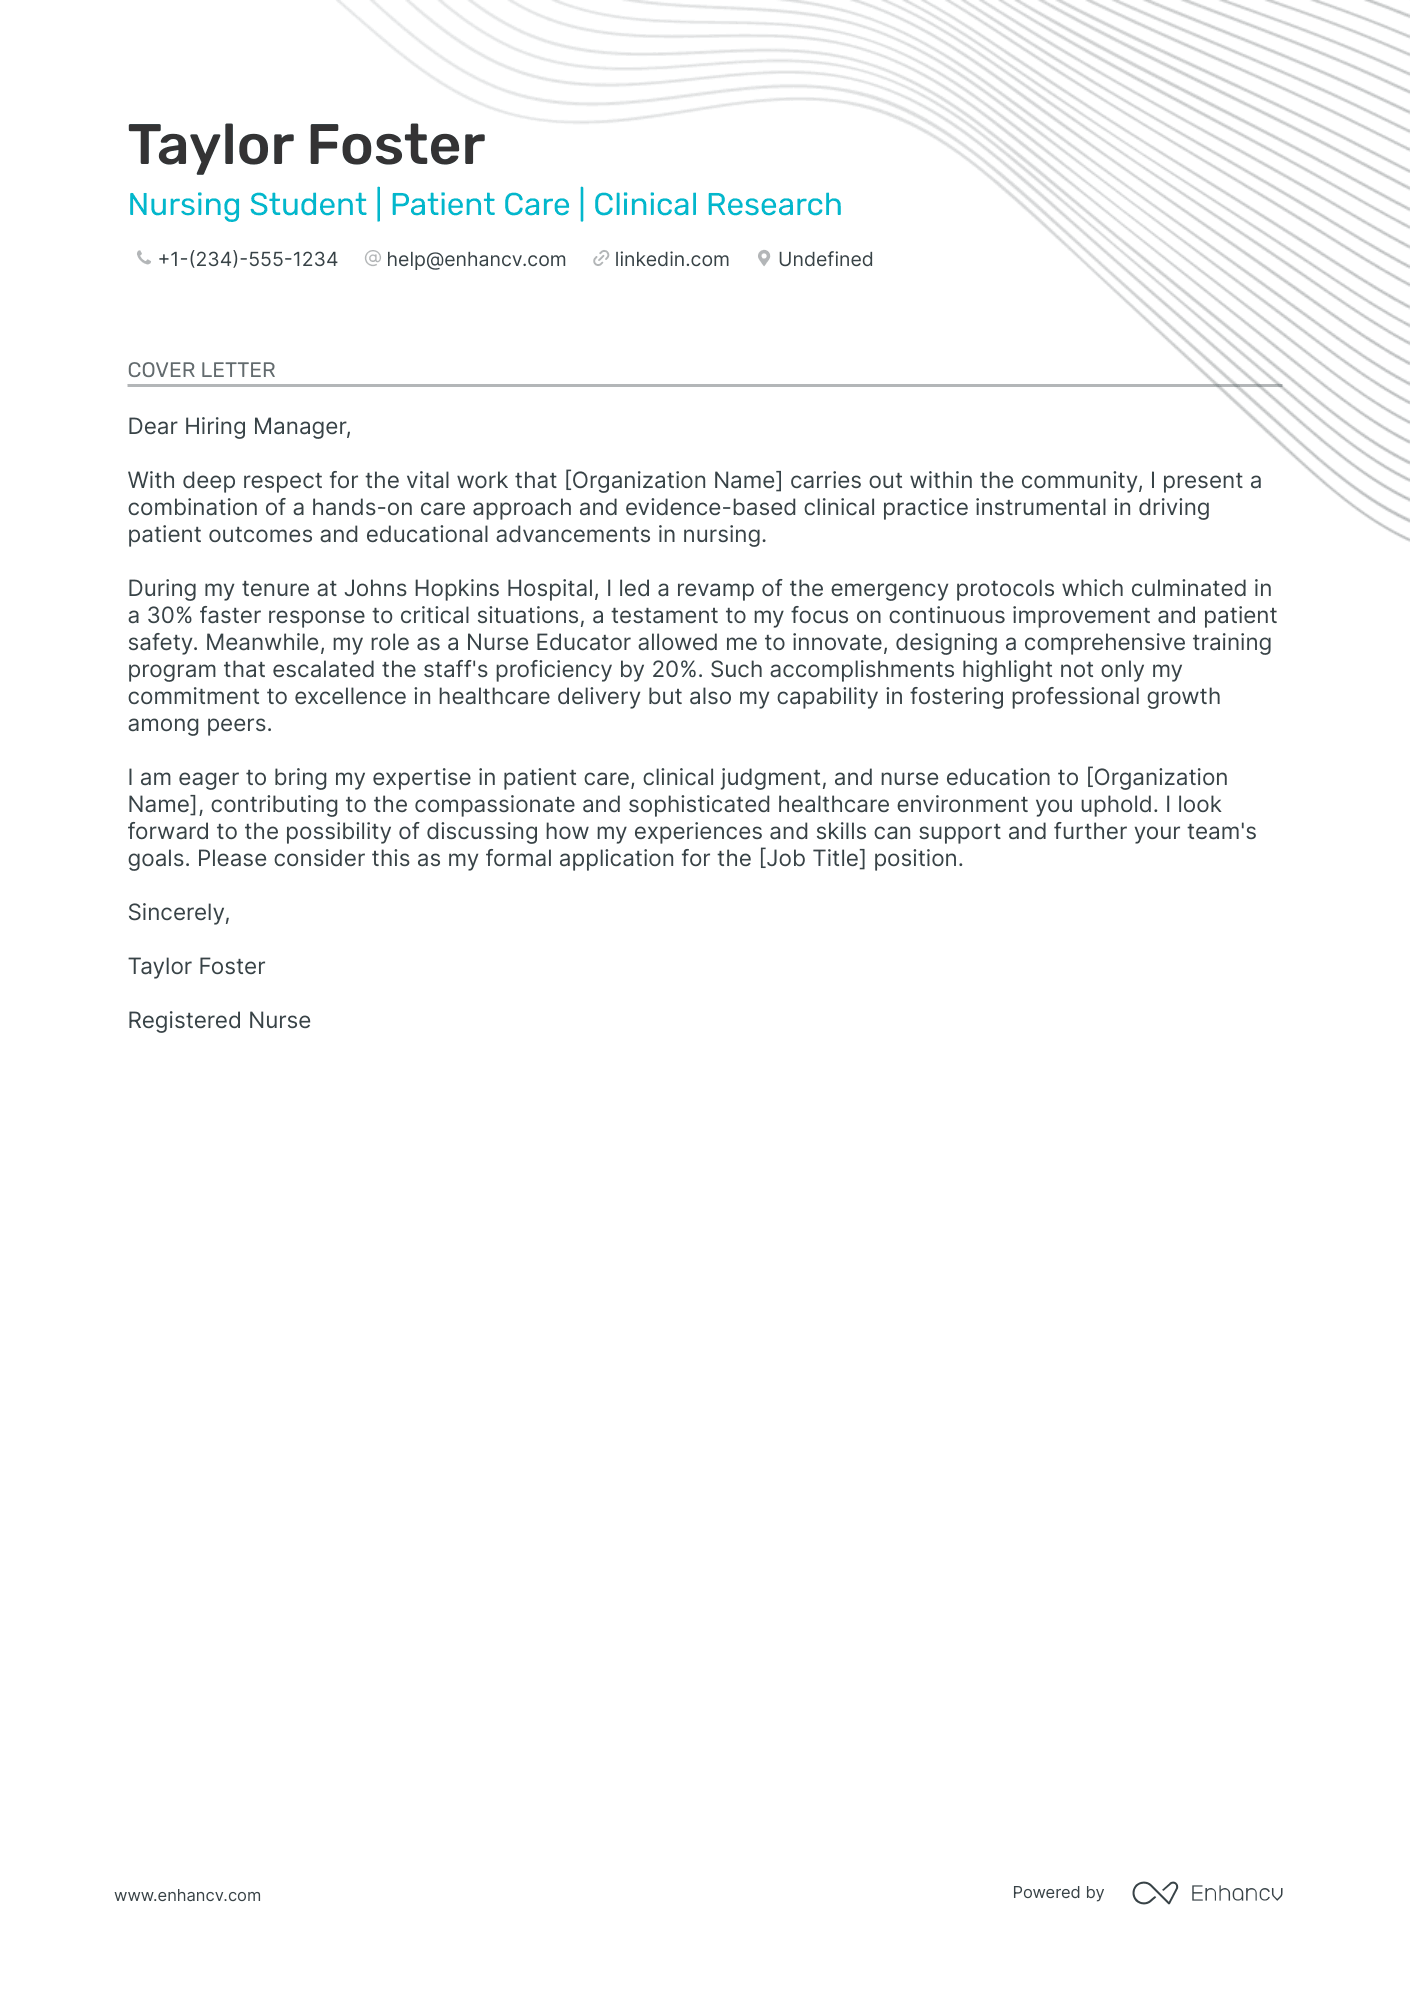 Nursing Student Clinical Experience cover letter